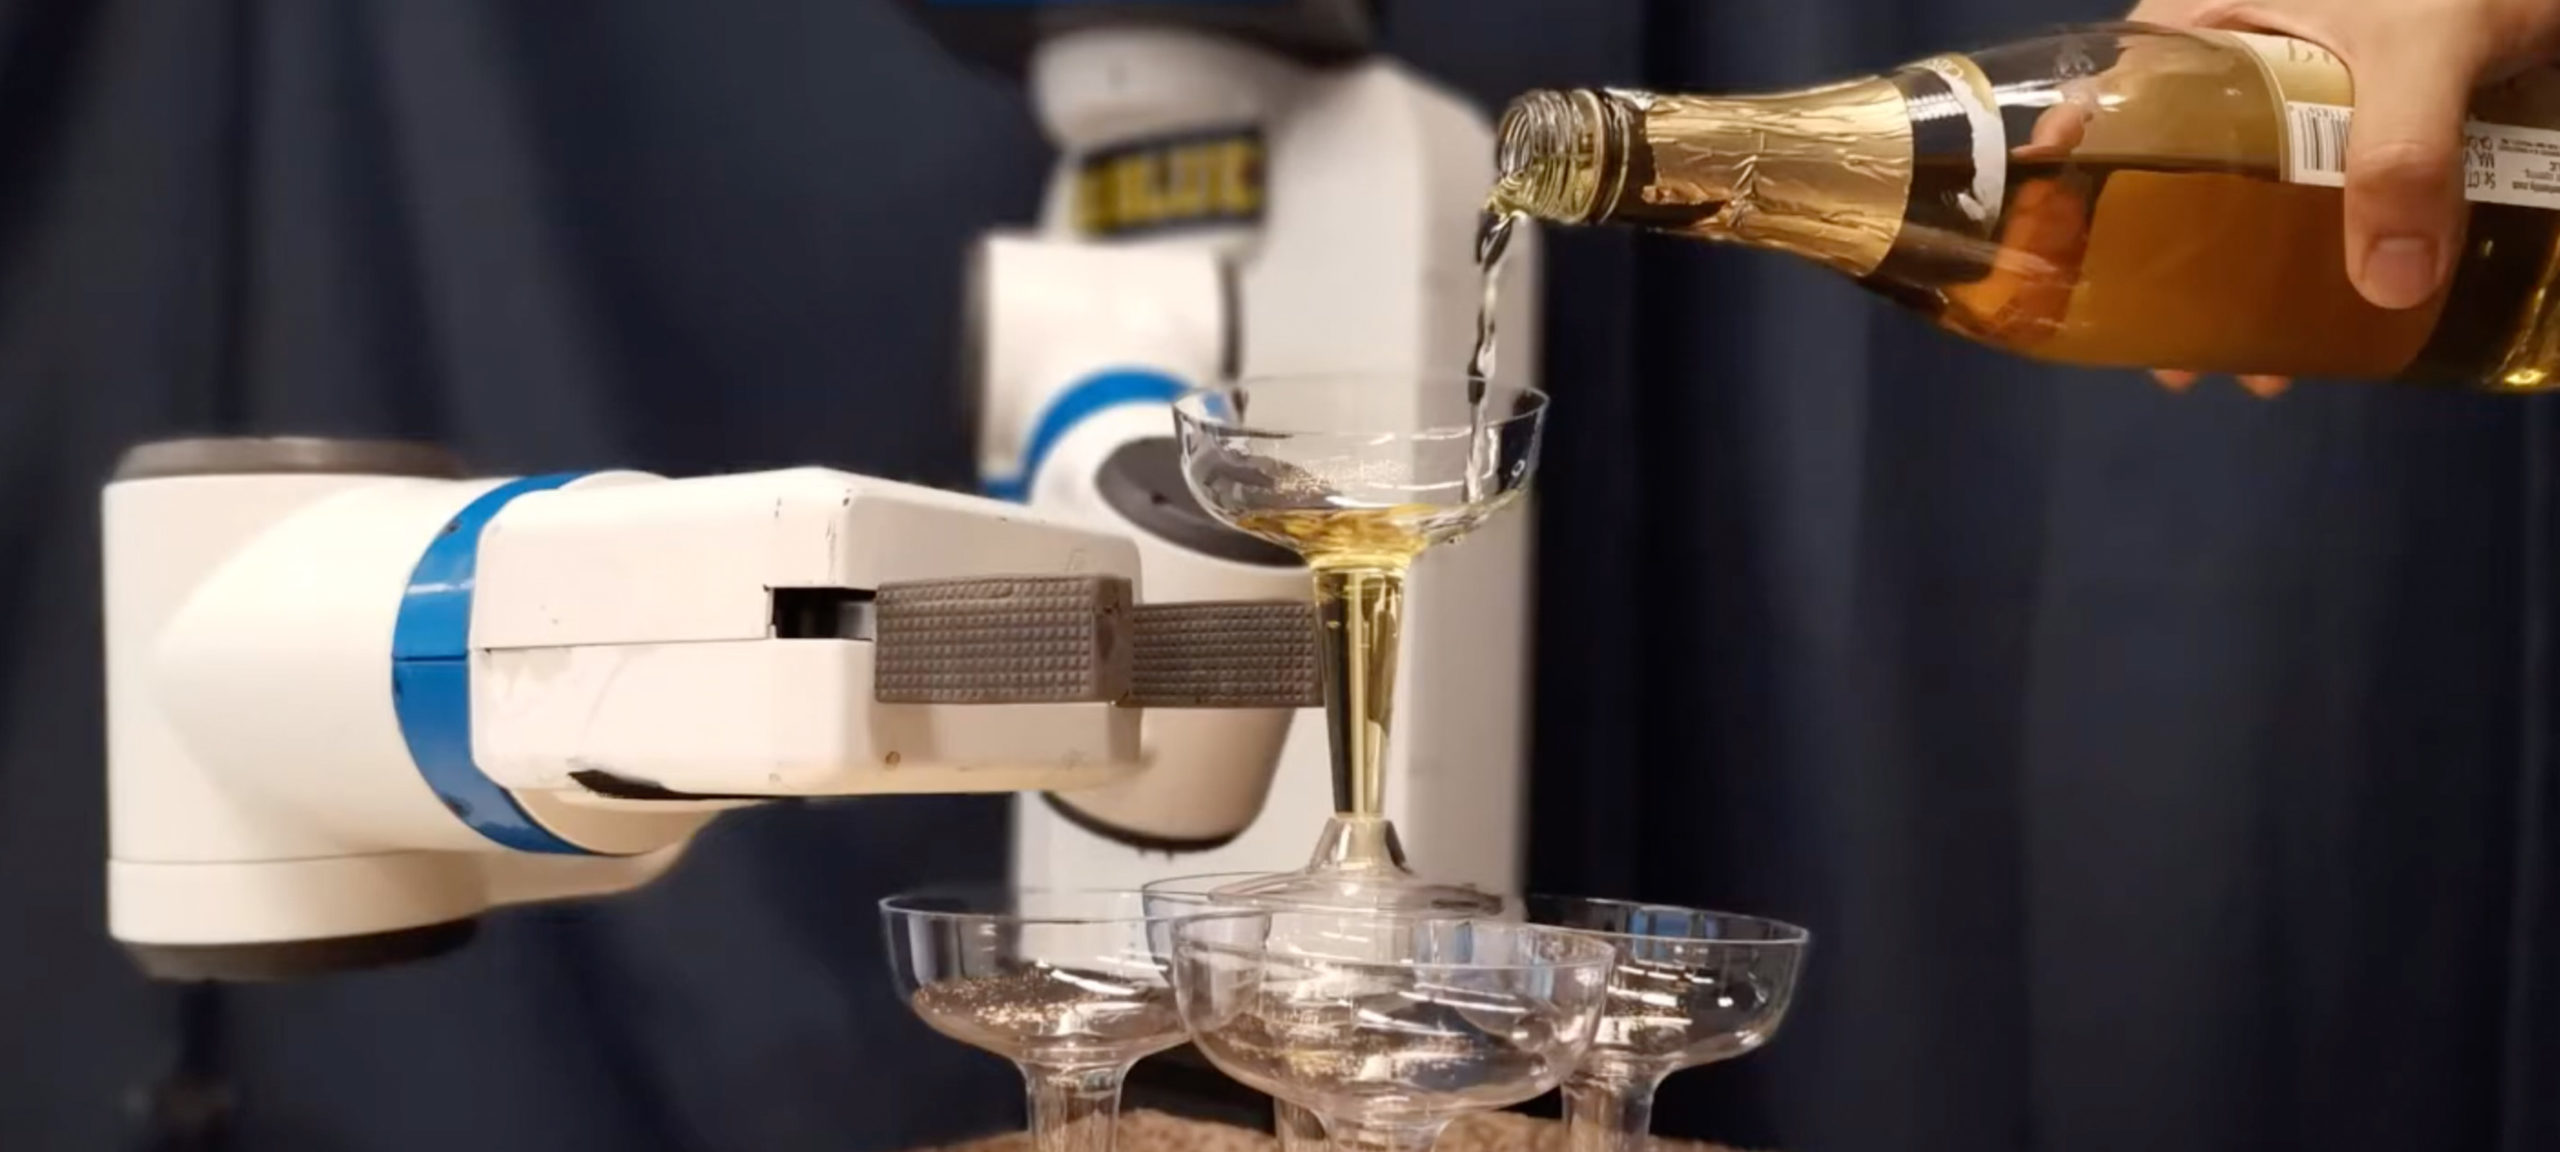 Robot building a tower of champagne glasses